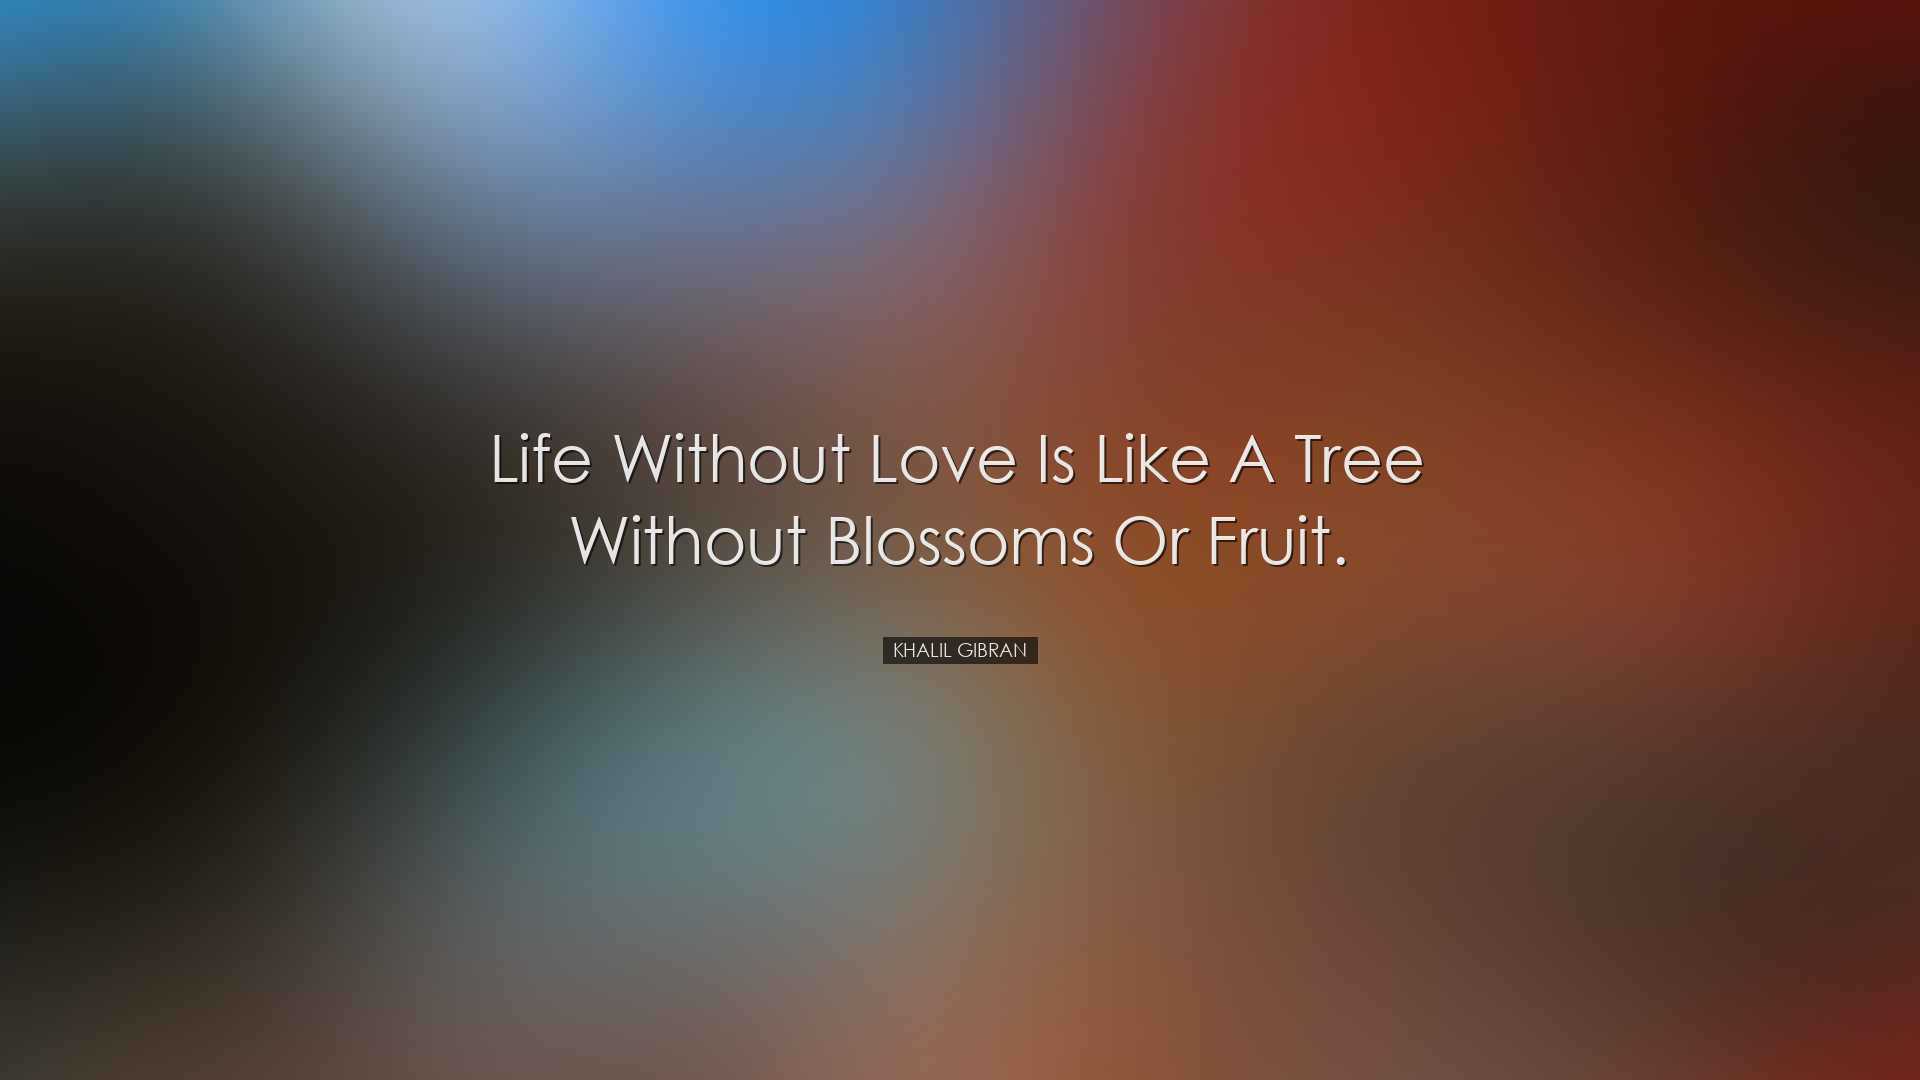 Life without love is like a tree without blossoms or fruit. - Khal